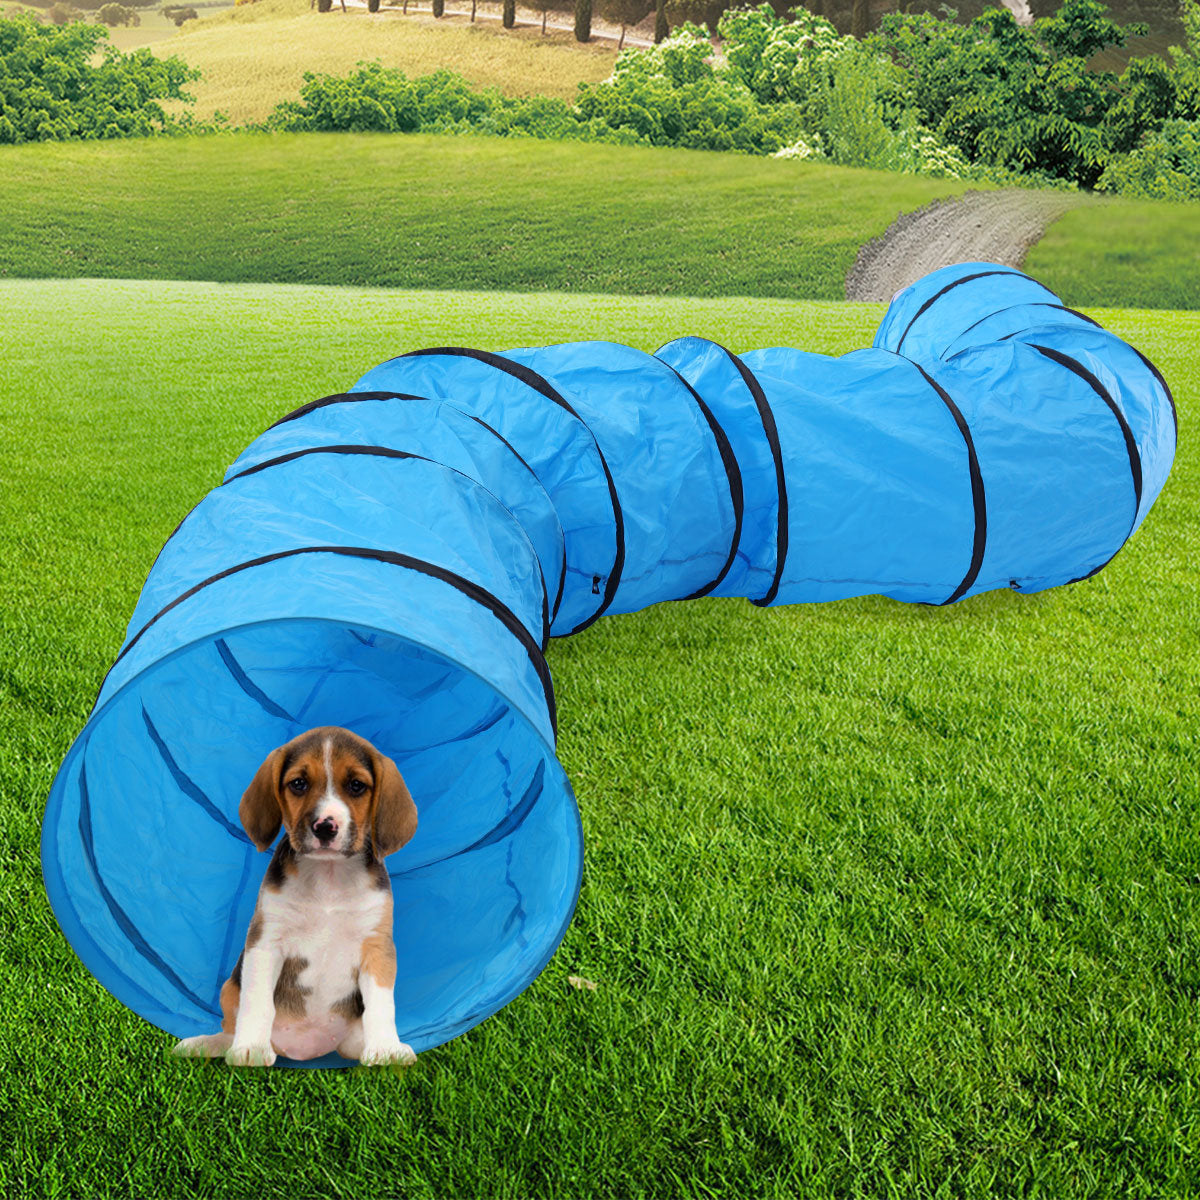 Collapsible Extra-long Pet Dog Agility Training Tunnel with Carry Bag and Stakes, Blue